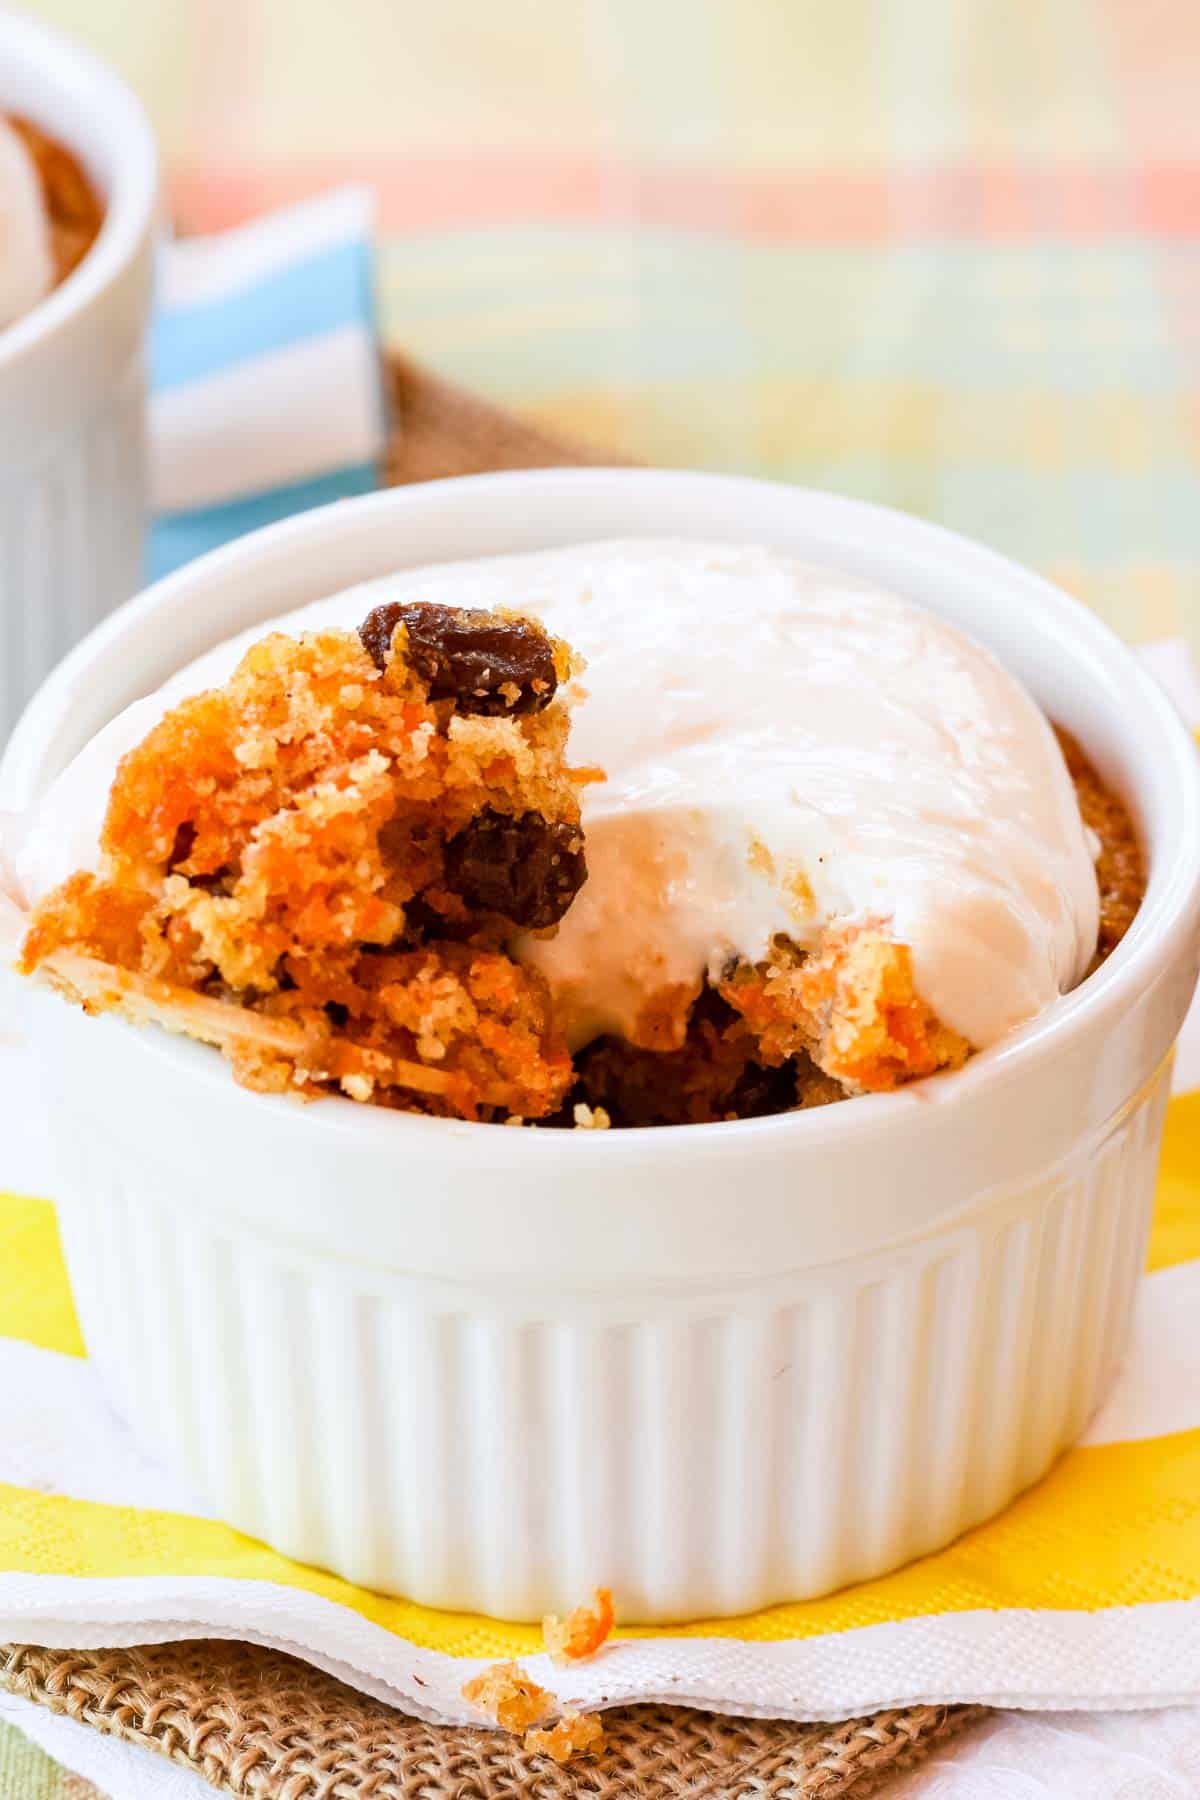 A spoon resting on the side of a ramekin fill of carrot cake with cream cheese frositng.